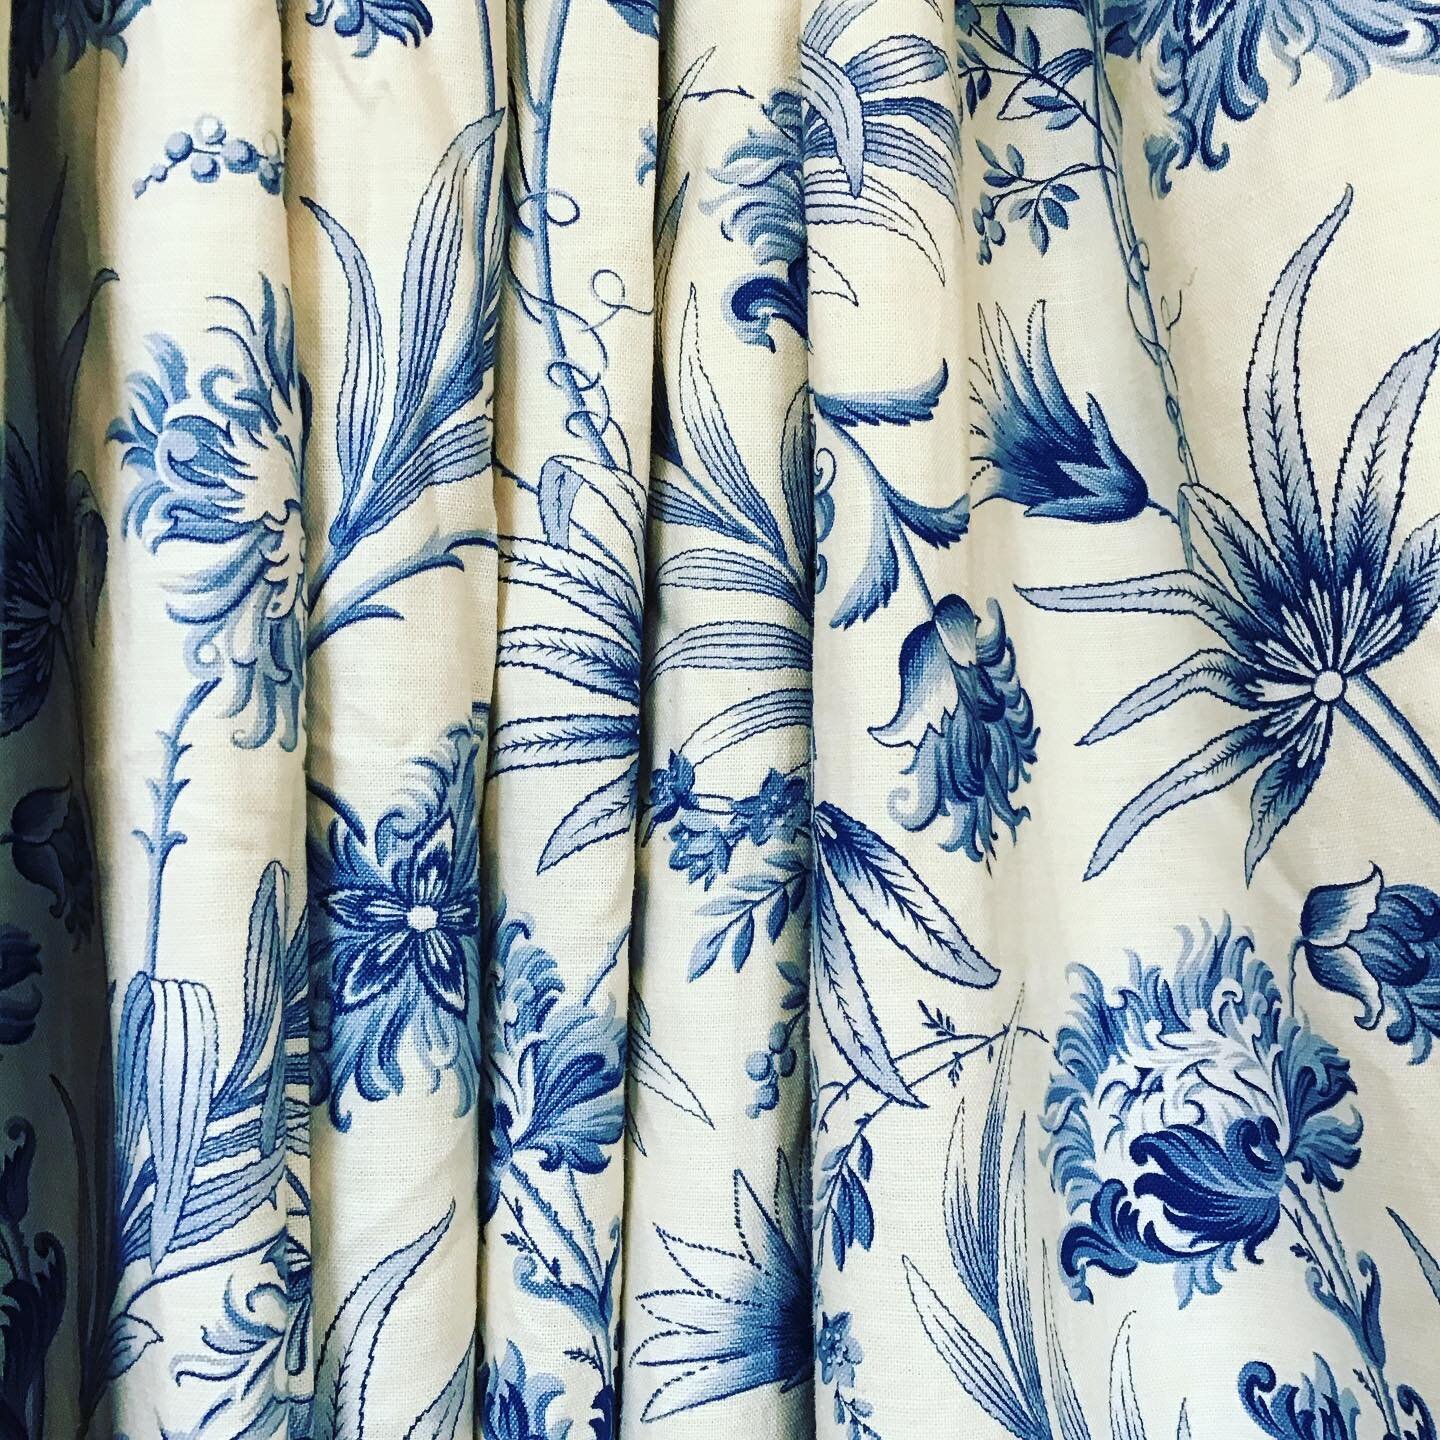 Just a few of our latest curtains here on sale at curtain revival. #modernflorals #beautifuldesigns #designerfabrics #countrylifestyle #interiordesign